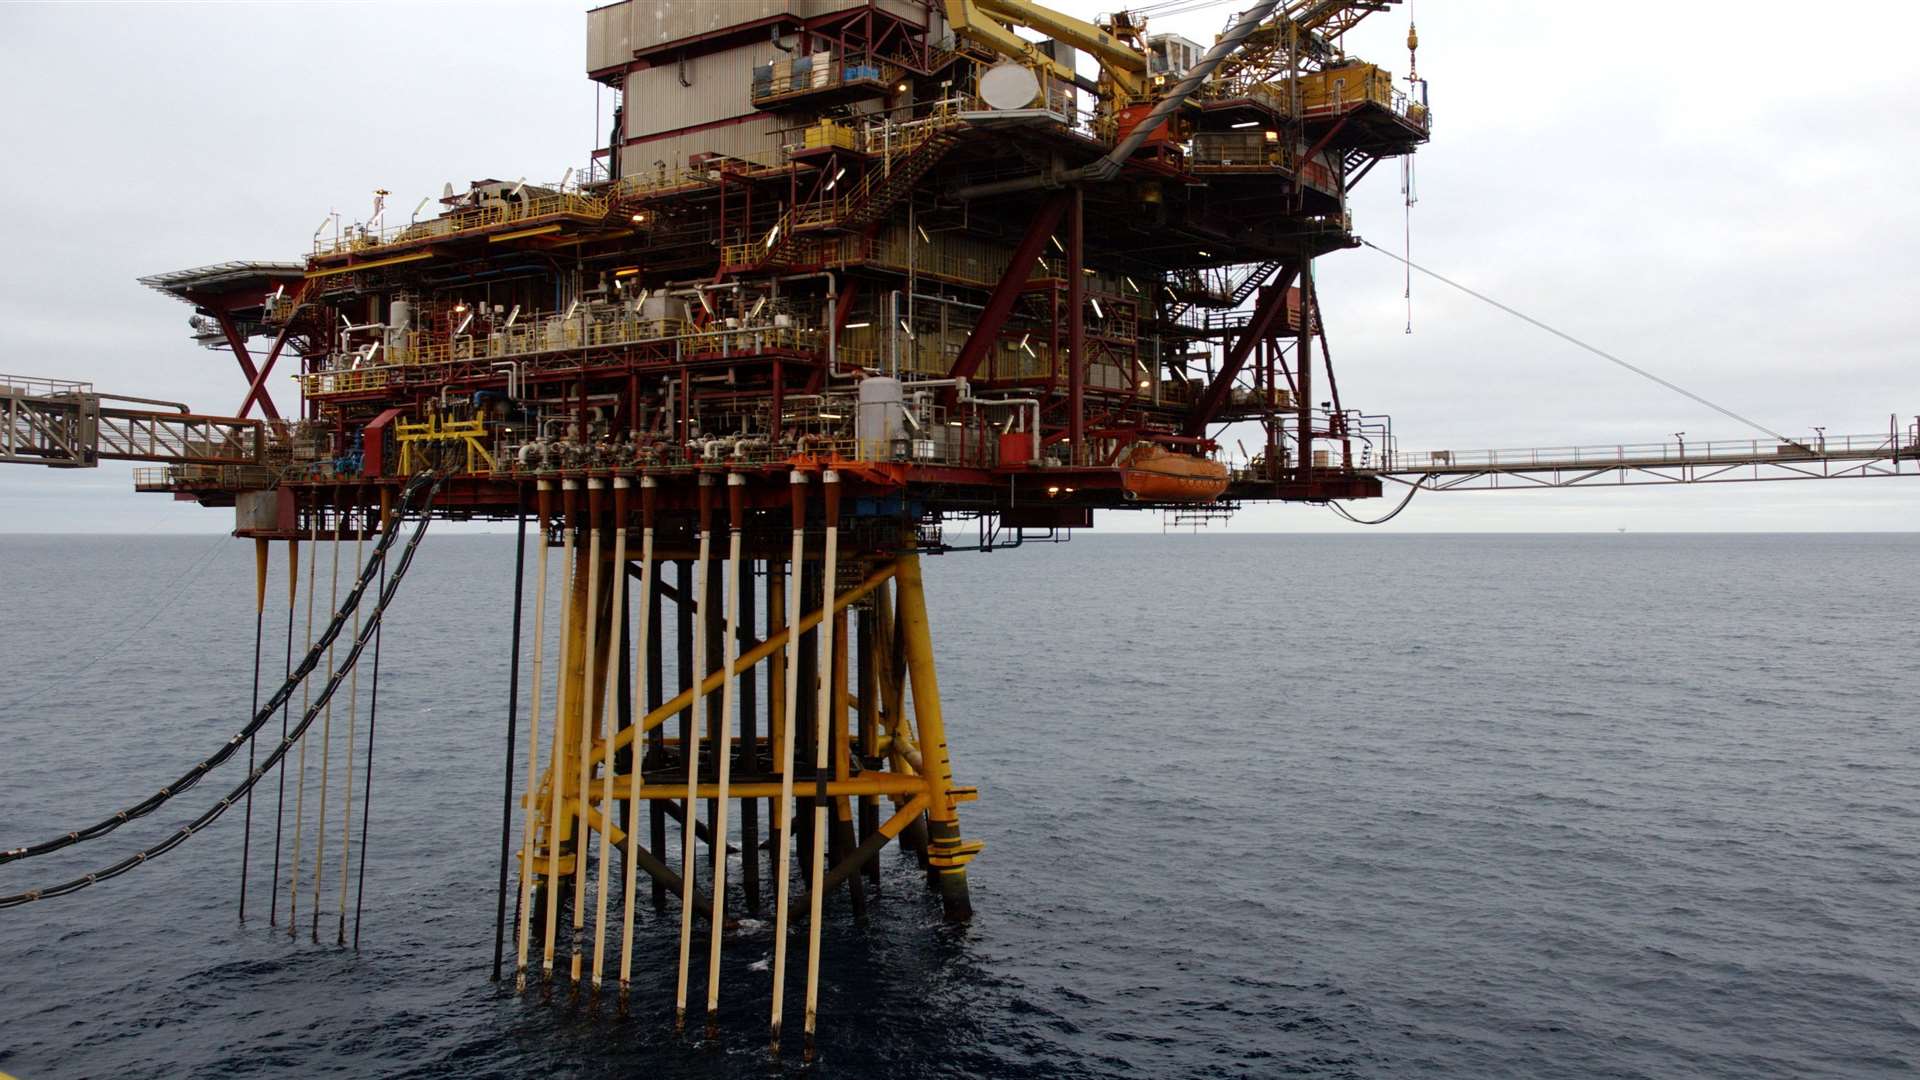 Jee carries out subsea engineering work for the oil and gas industry